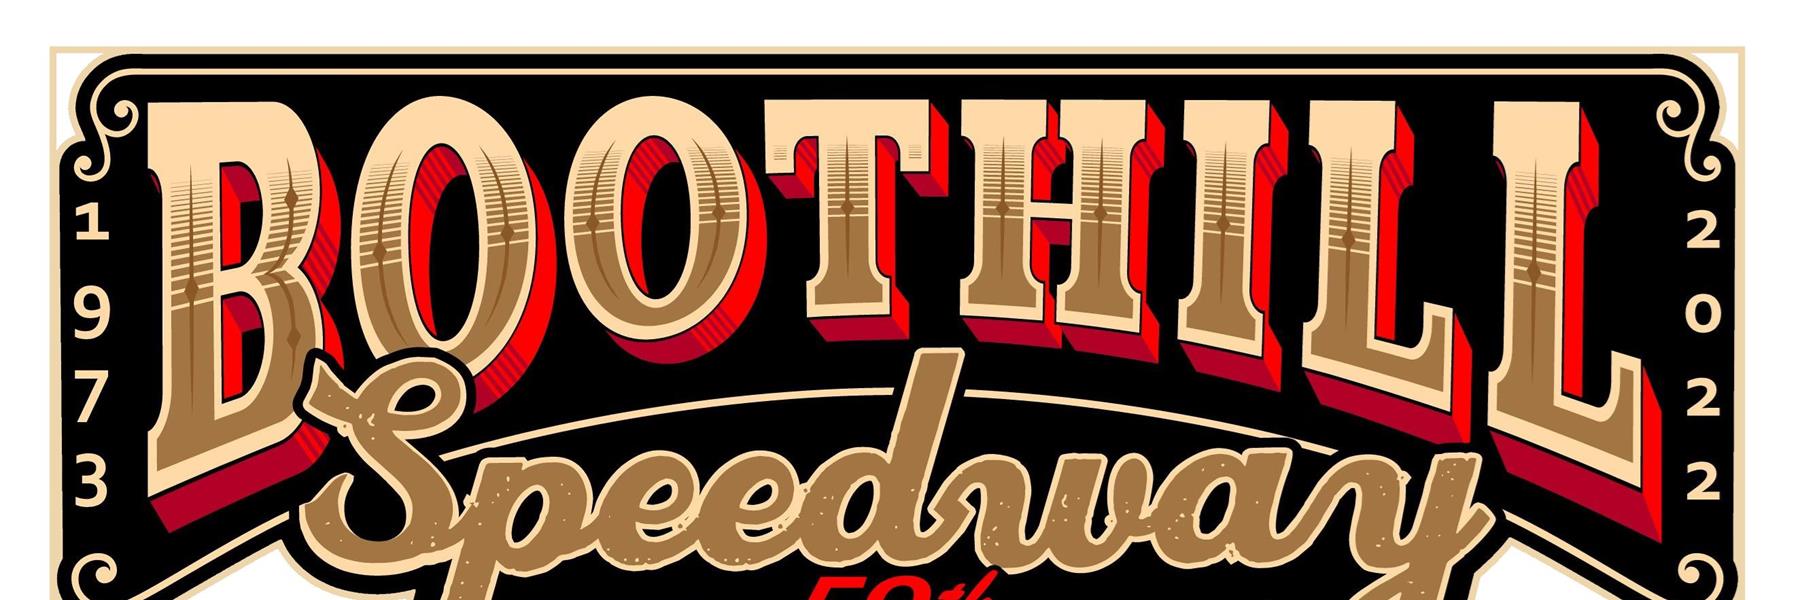 7/1/2022 - Boothill Speedway